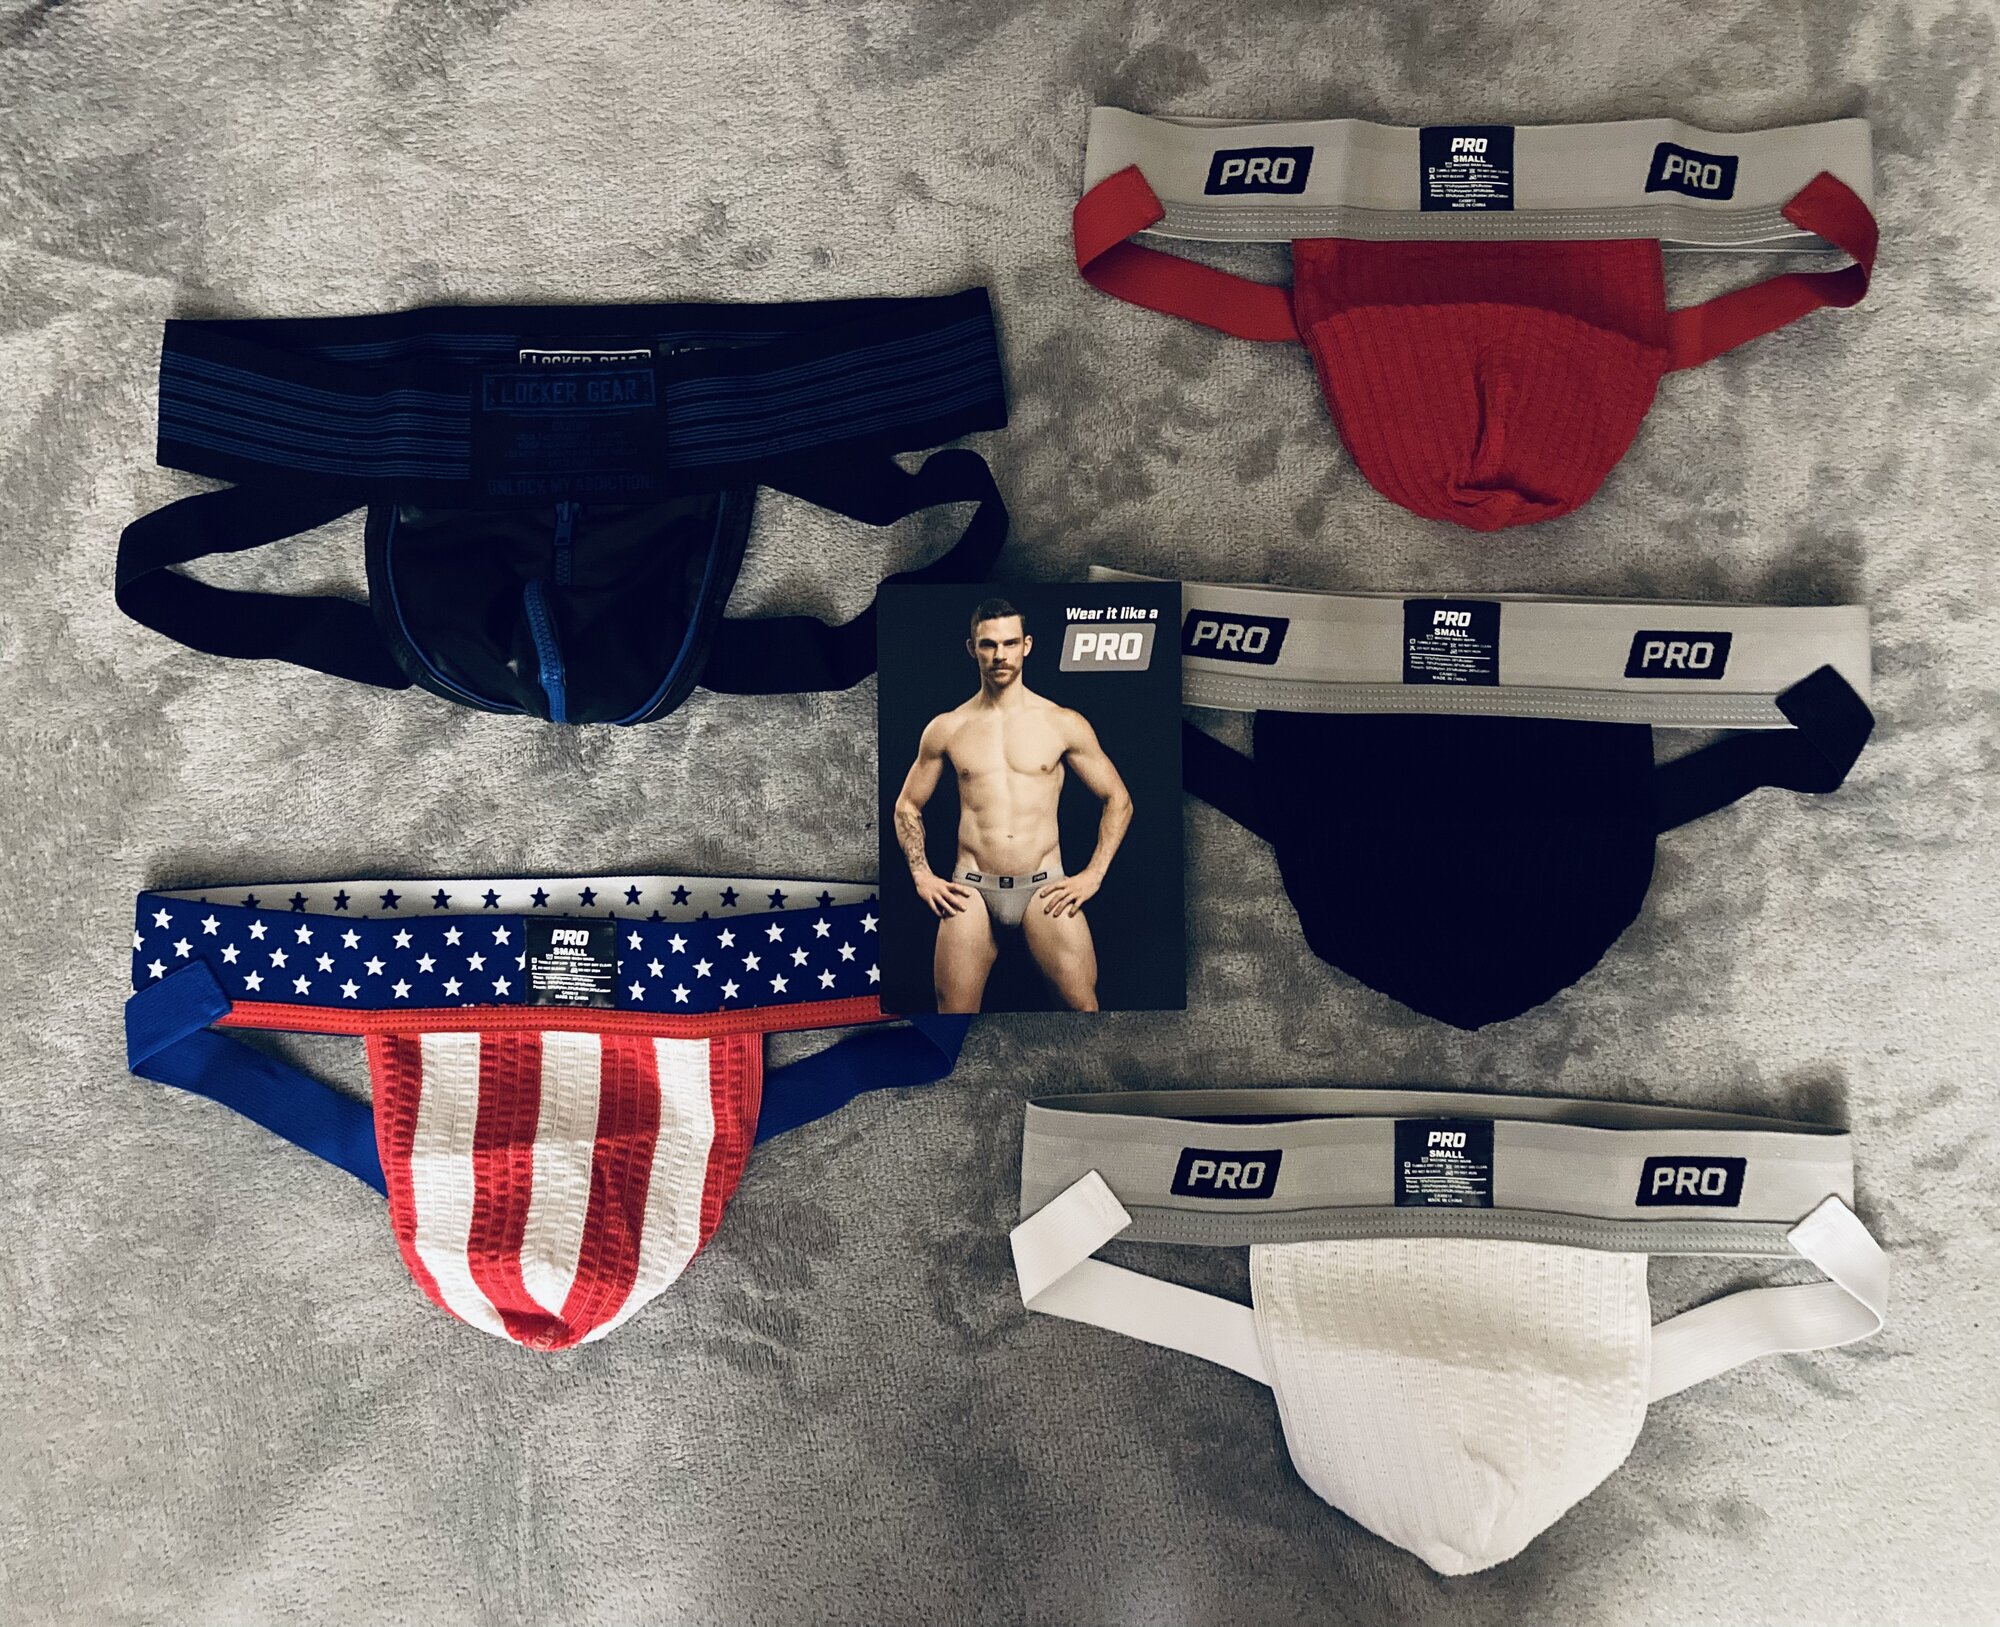 All my new jocks from the Black Friday Sale!